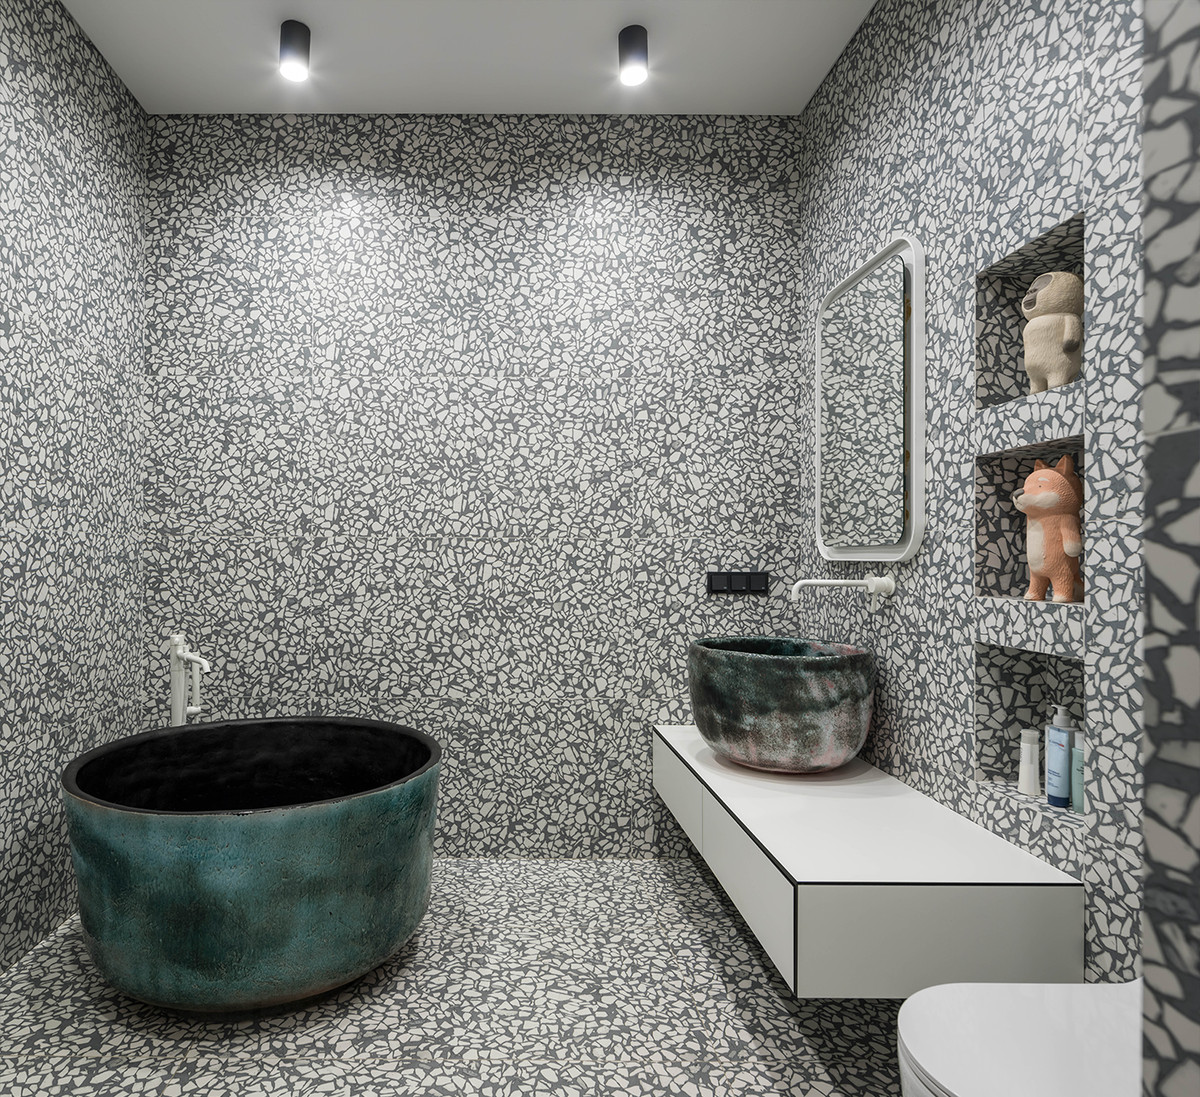 A bathroom with marbled walls and floors and a round bathtub.